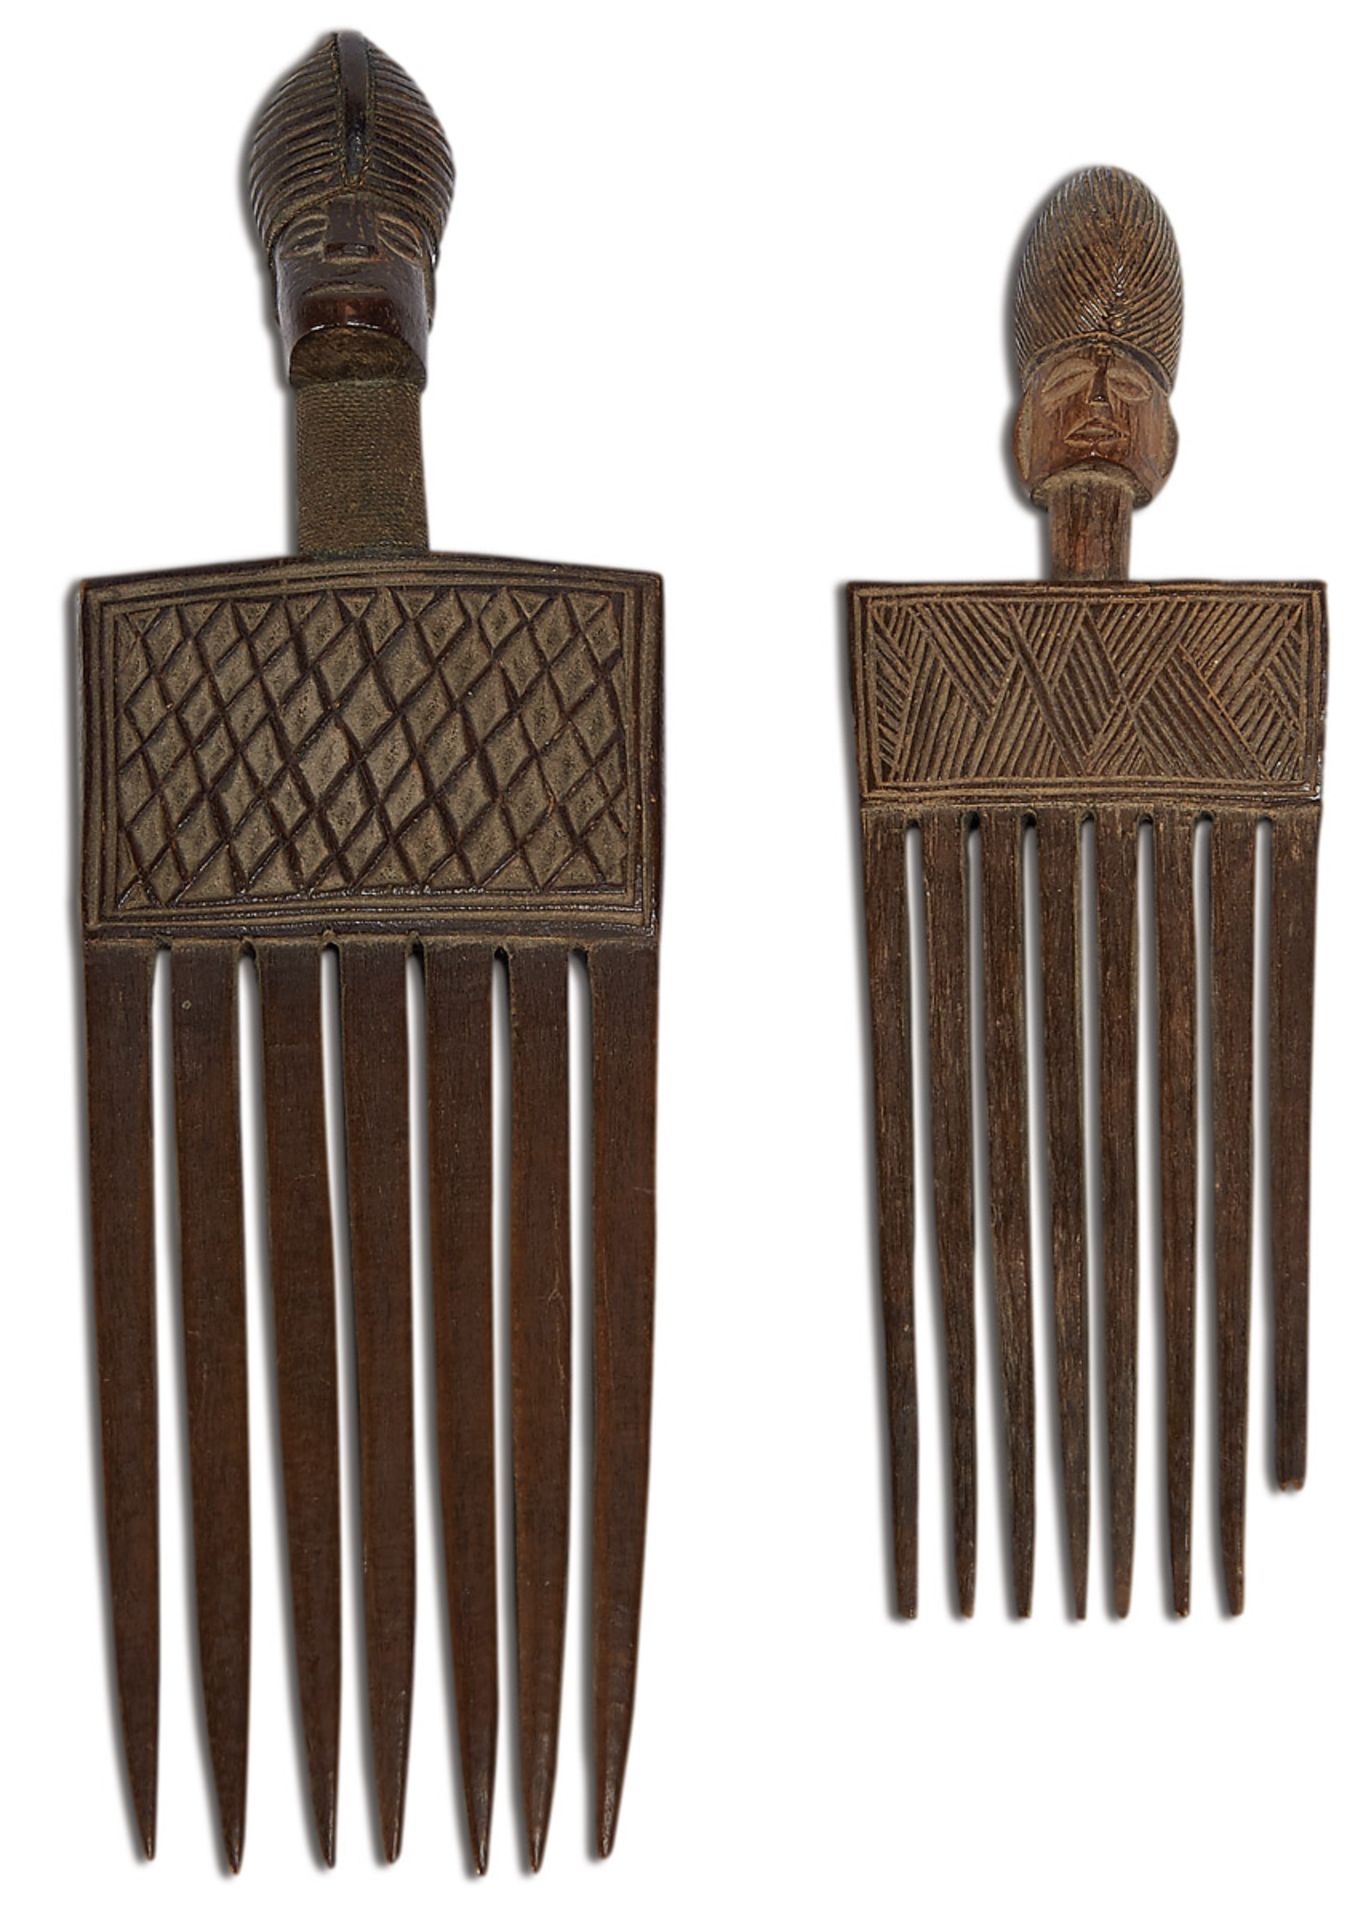 Two Combs "Female figures", carved wood and metal thread, Tchokwe (Quioco) - Angola, 19th/20th C.,